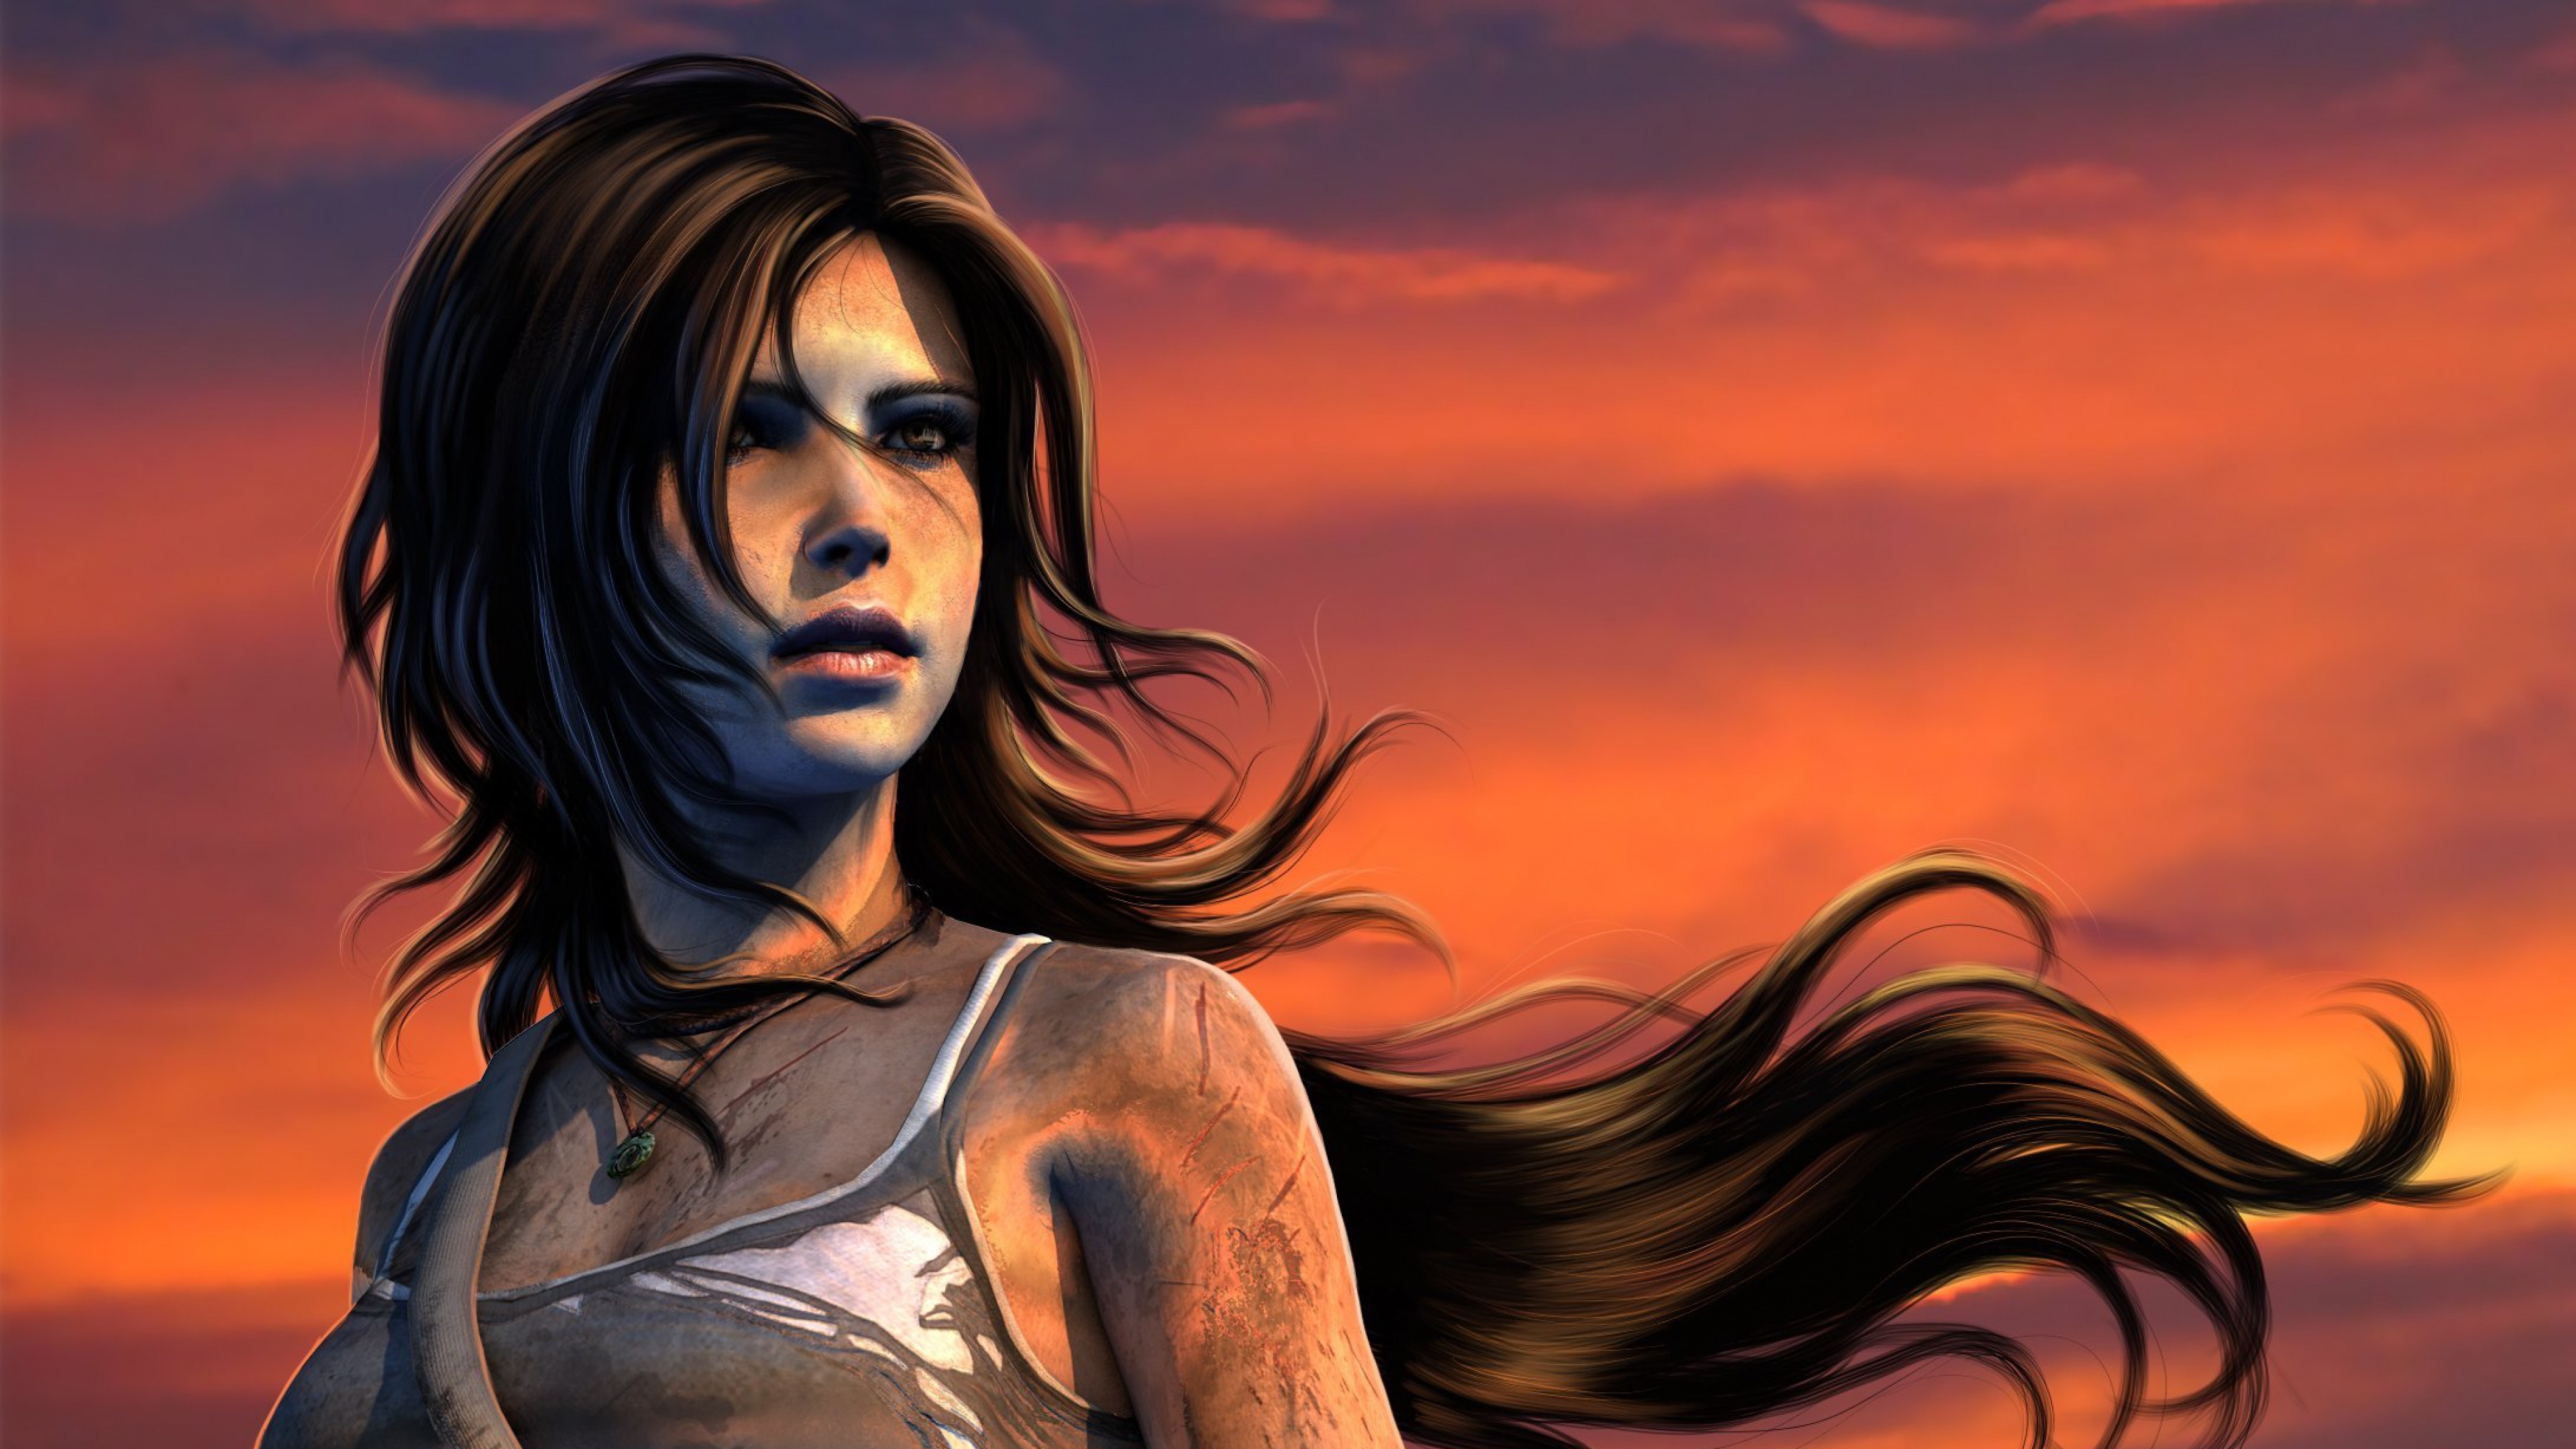 General 3840x2160 artwork Video Game Heroes necklace video game art video games long hair Tomb Raider Lara Croft (Tomb Raider) video game girls video game characters orange sky looking into the distance adventurers